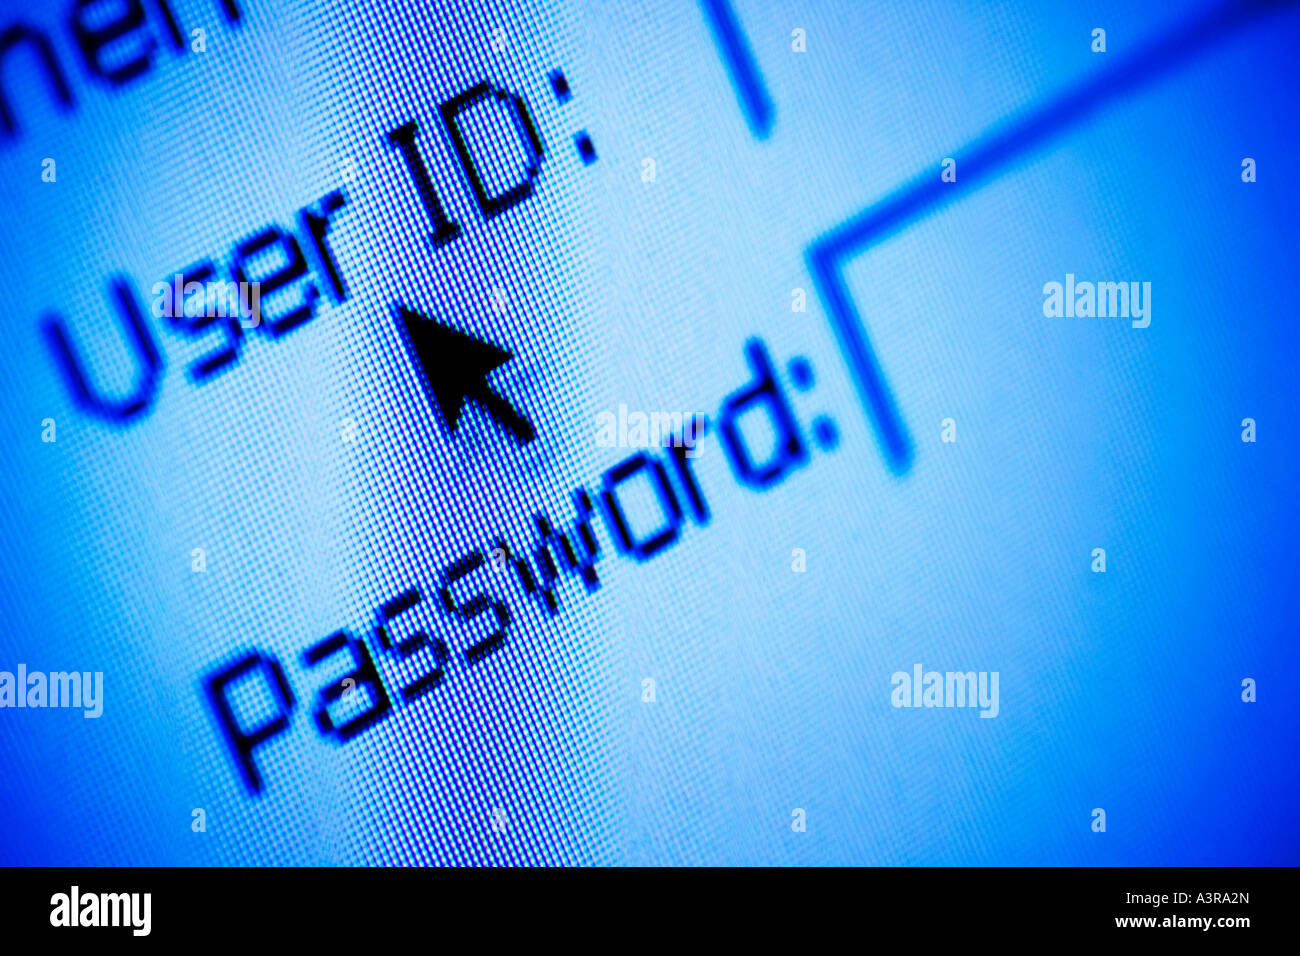 Username and password security on a website Stock Photo